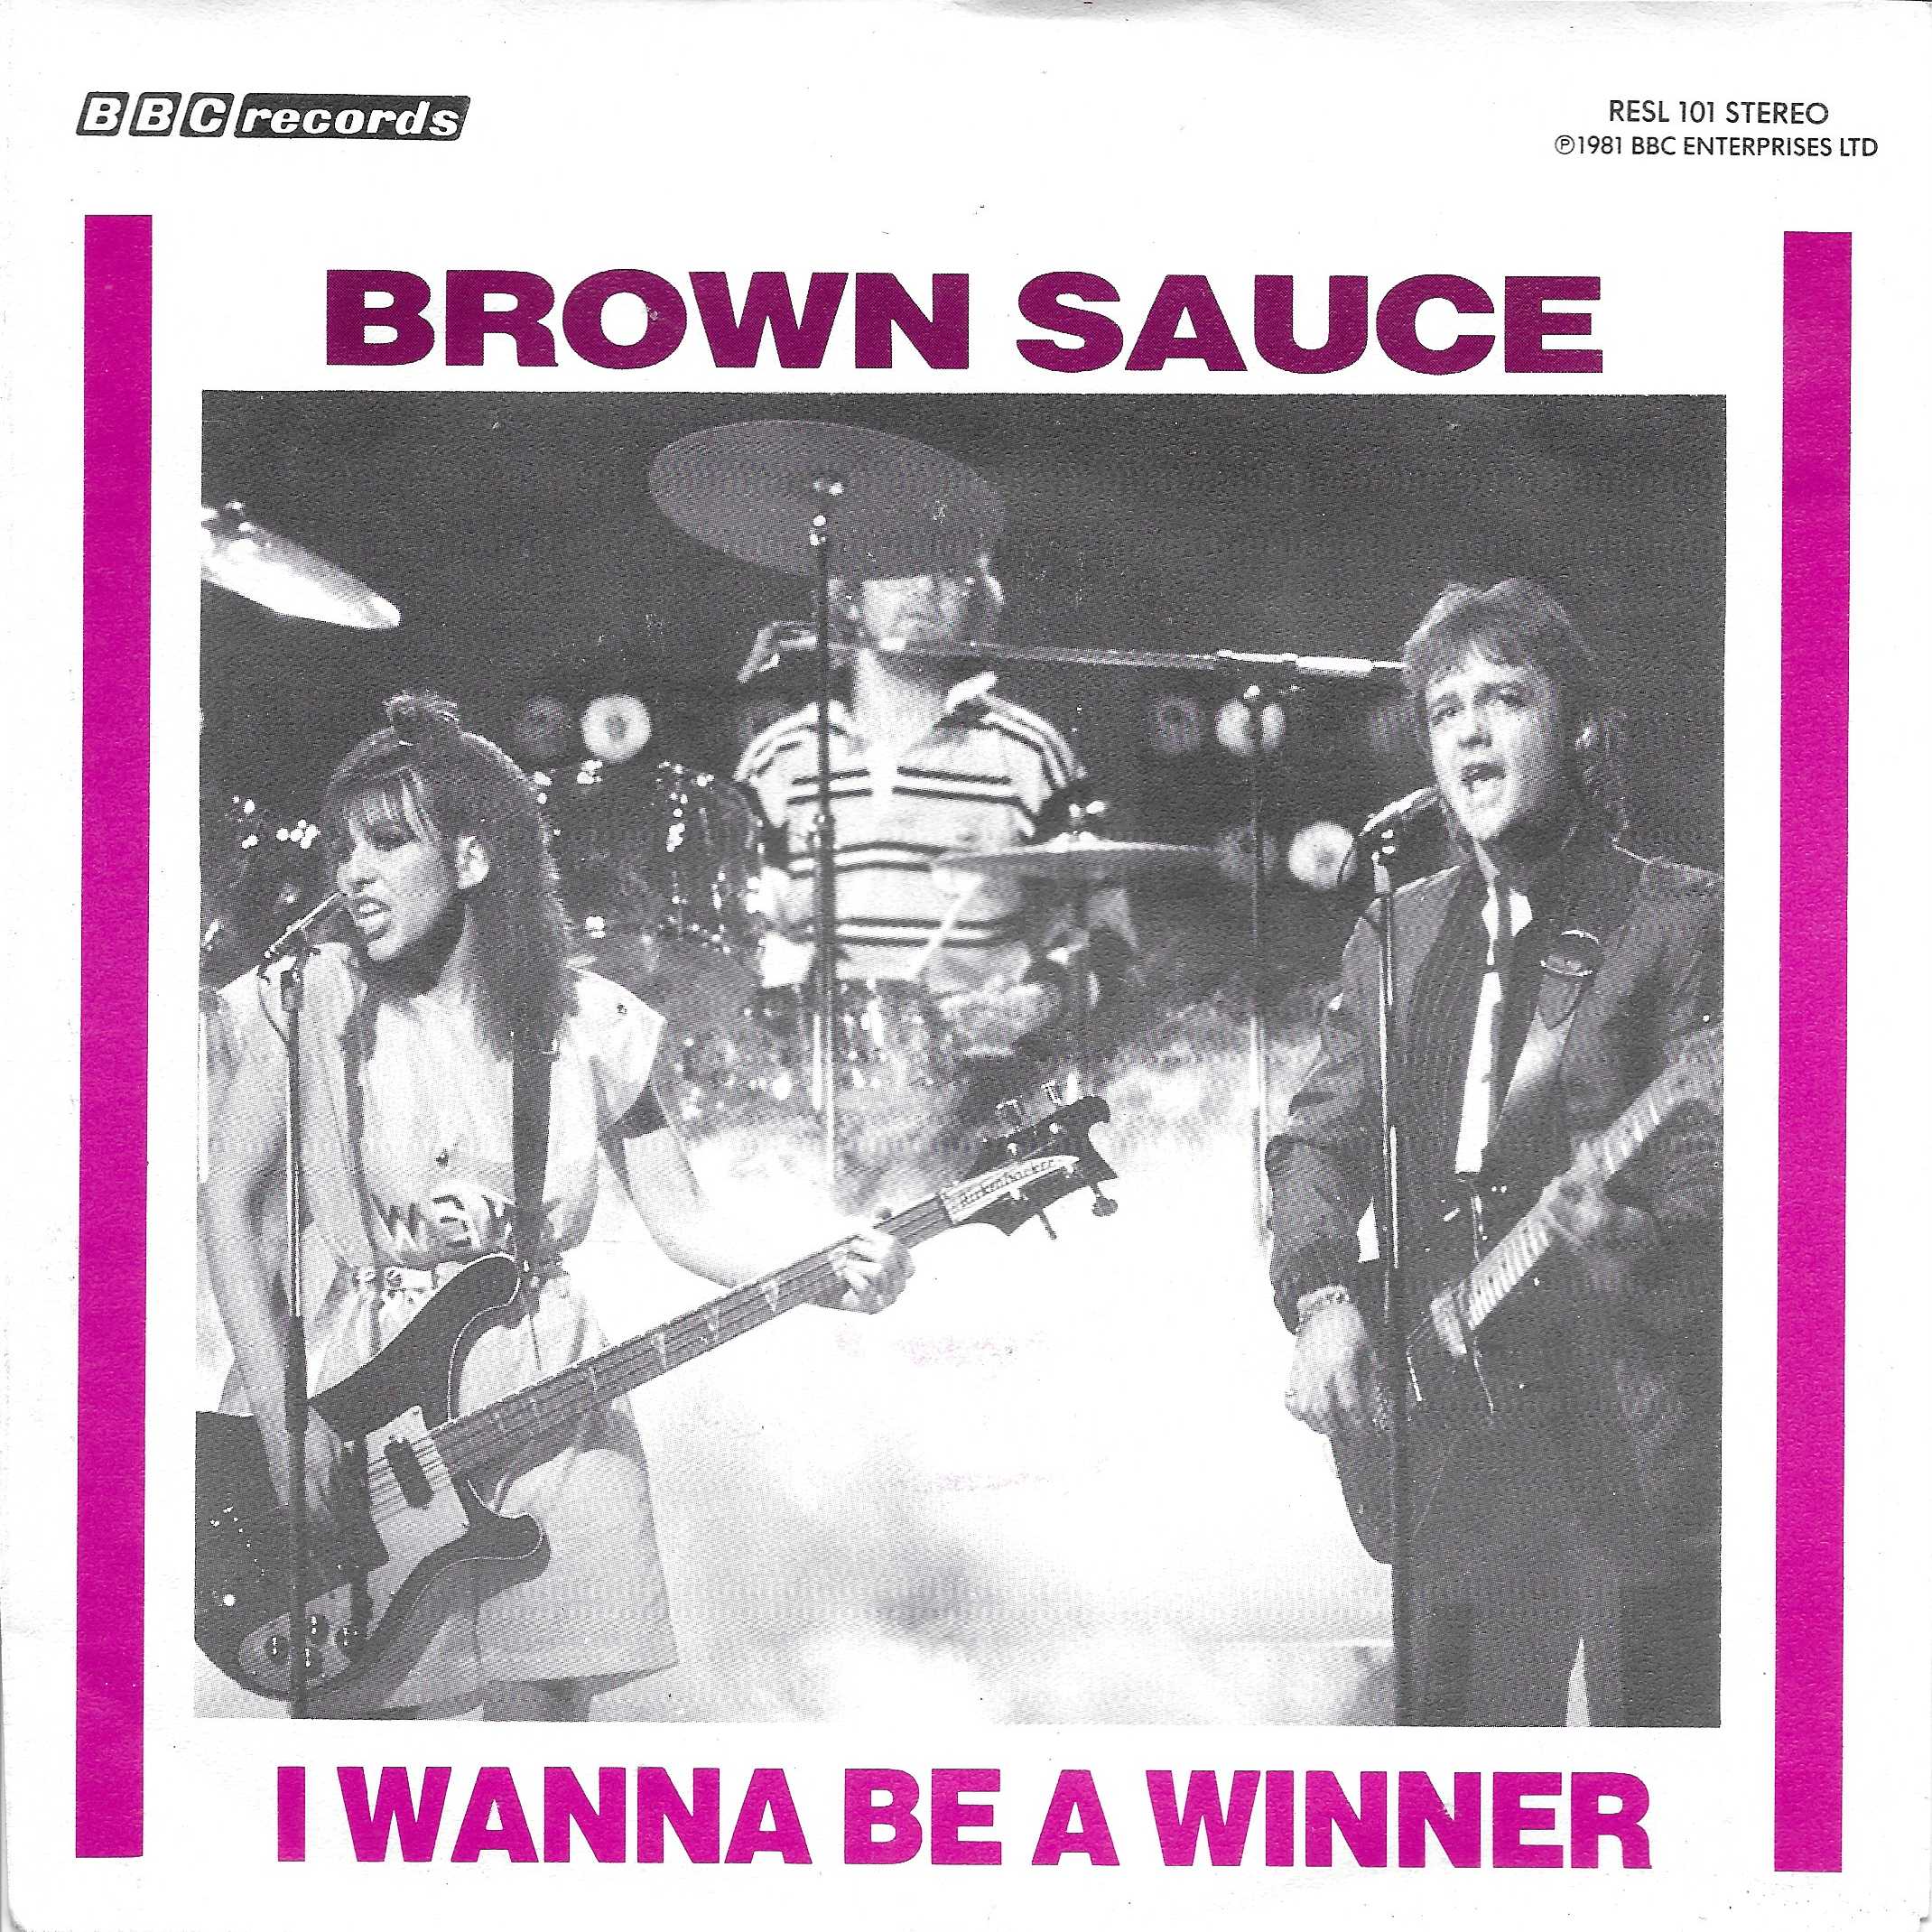 Picture of RESL 101-iD I wanna be a winner (Swap shop) by artist B. A. Robertson from the BBC records and Tapes library